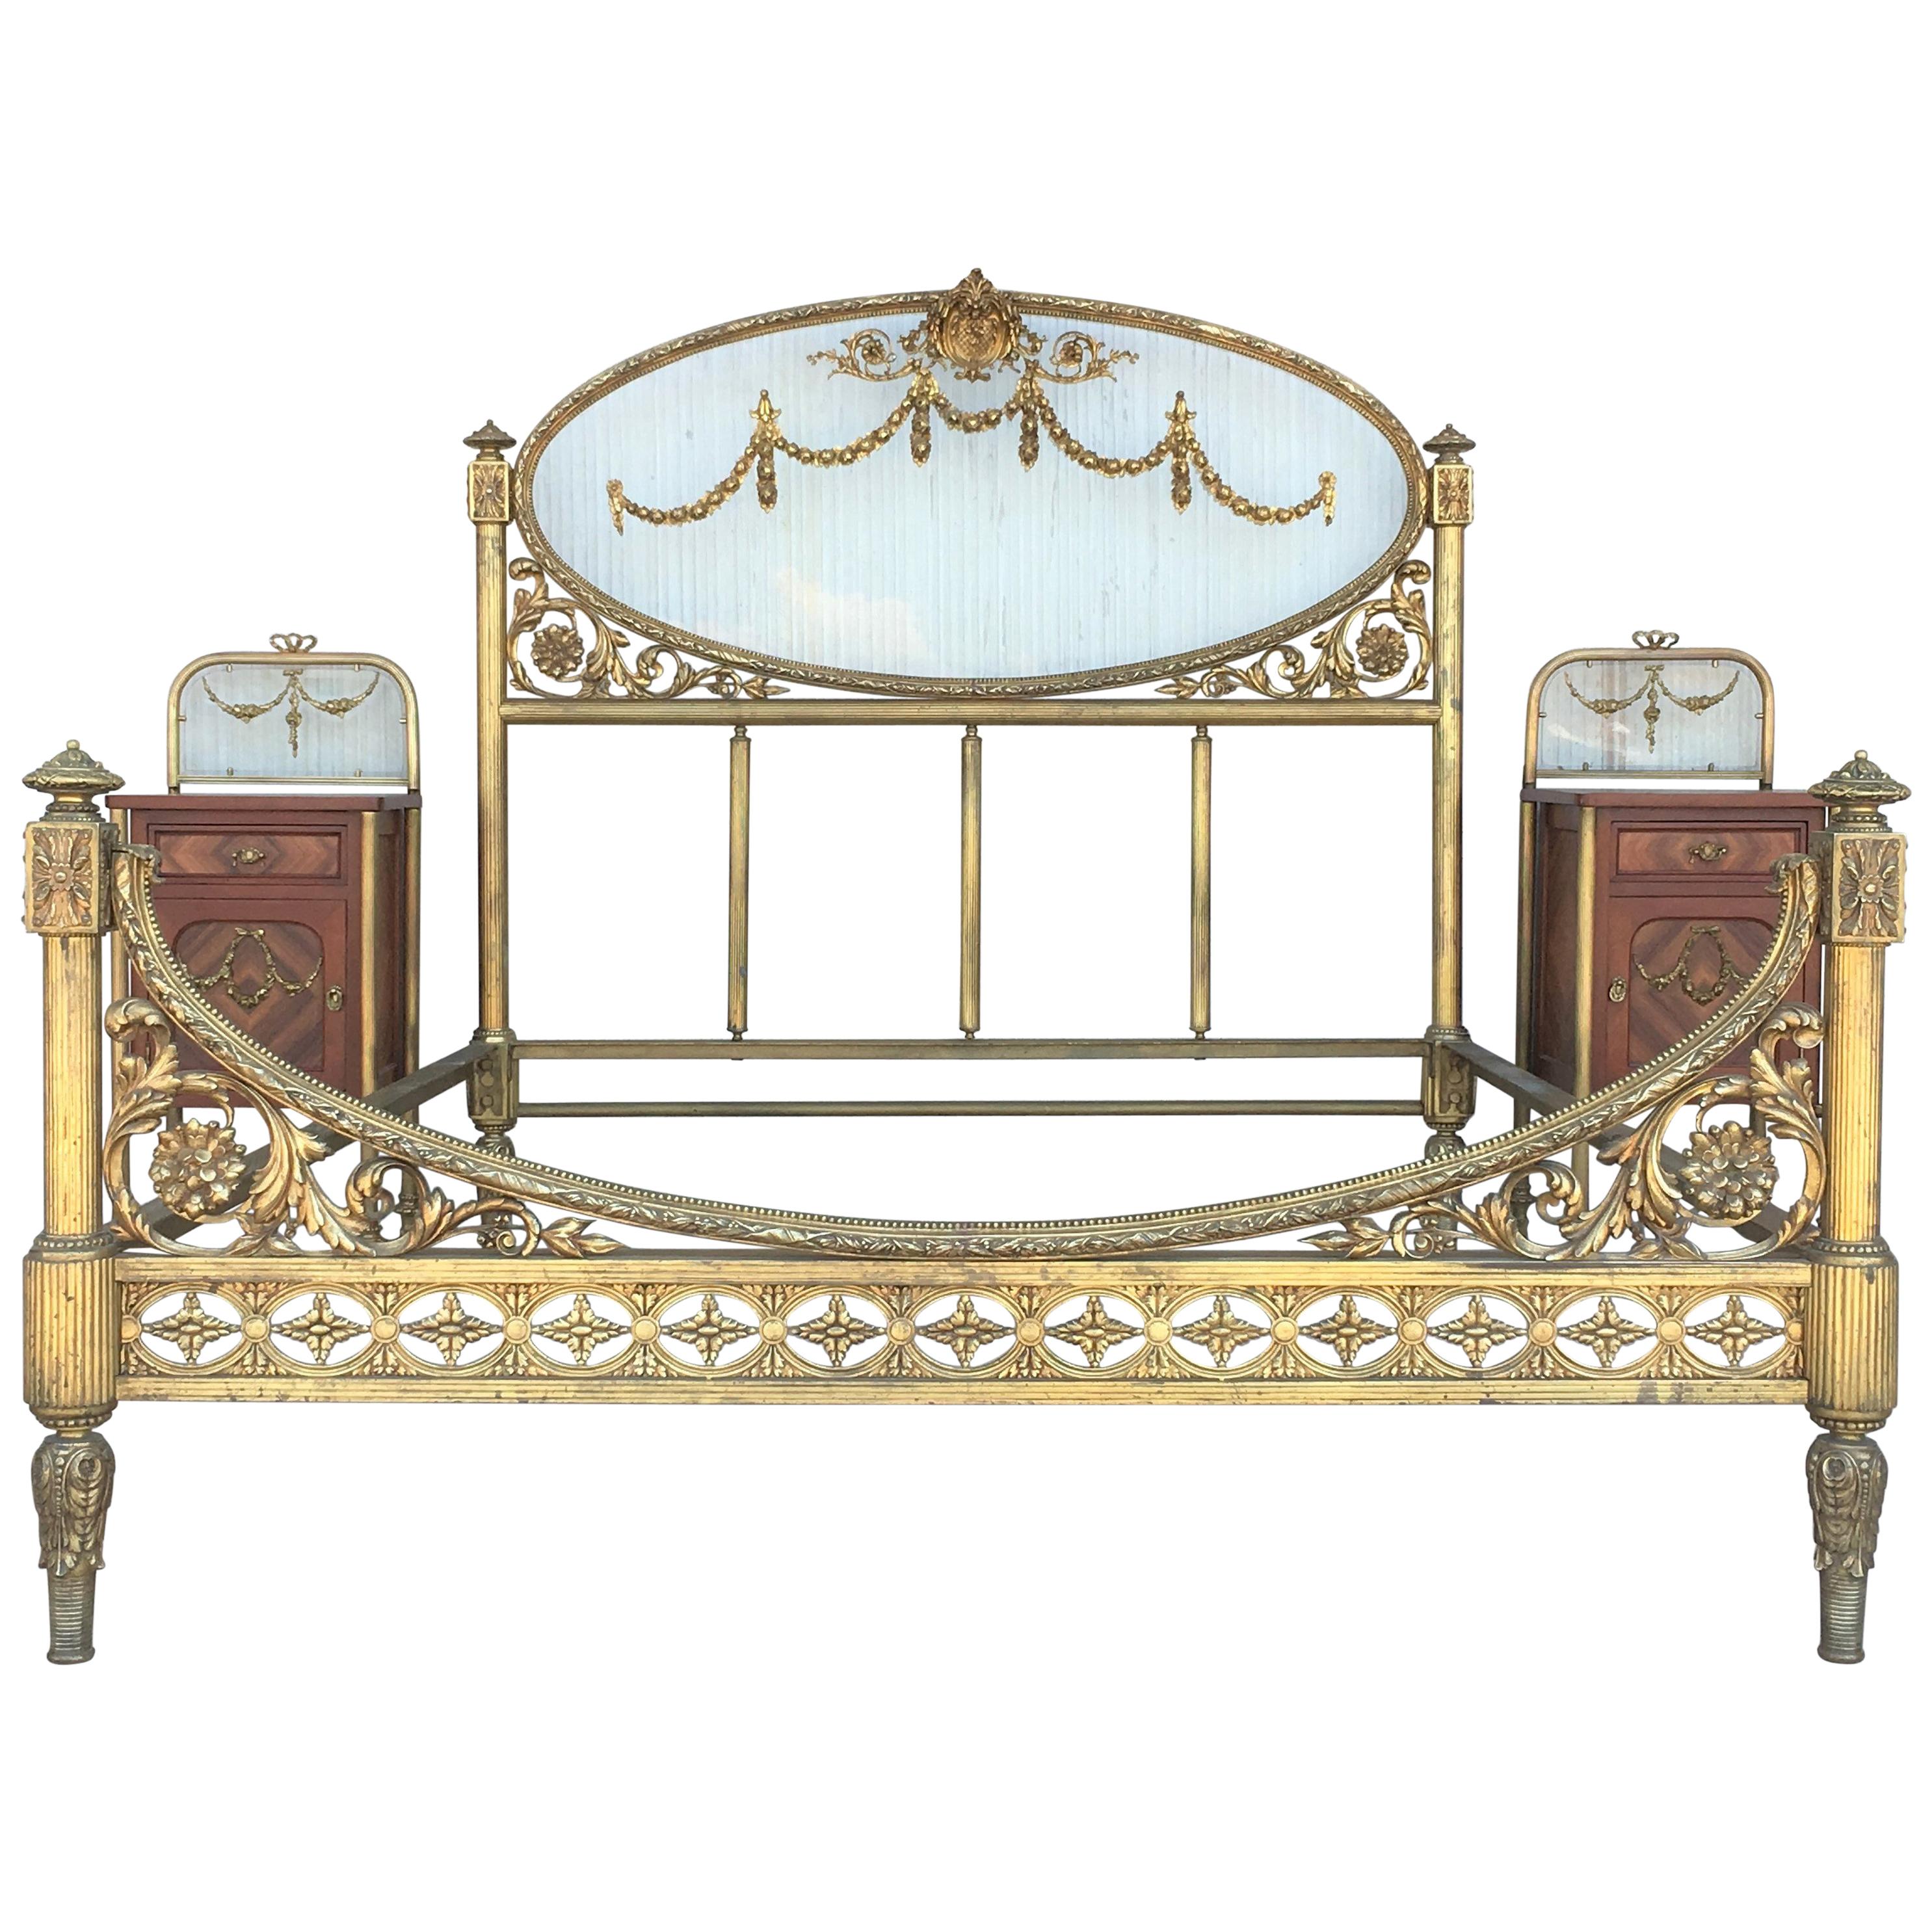 19th Century Full Bedroom Set French Belle Époque Bronze Iron Brass and Glass